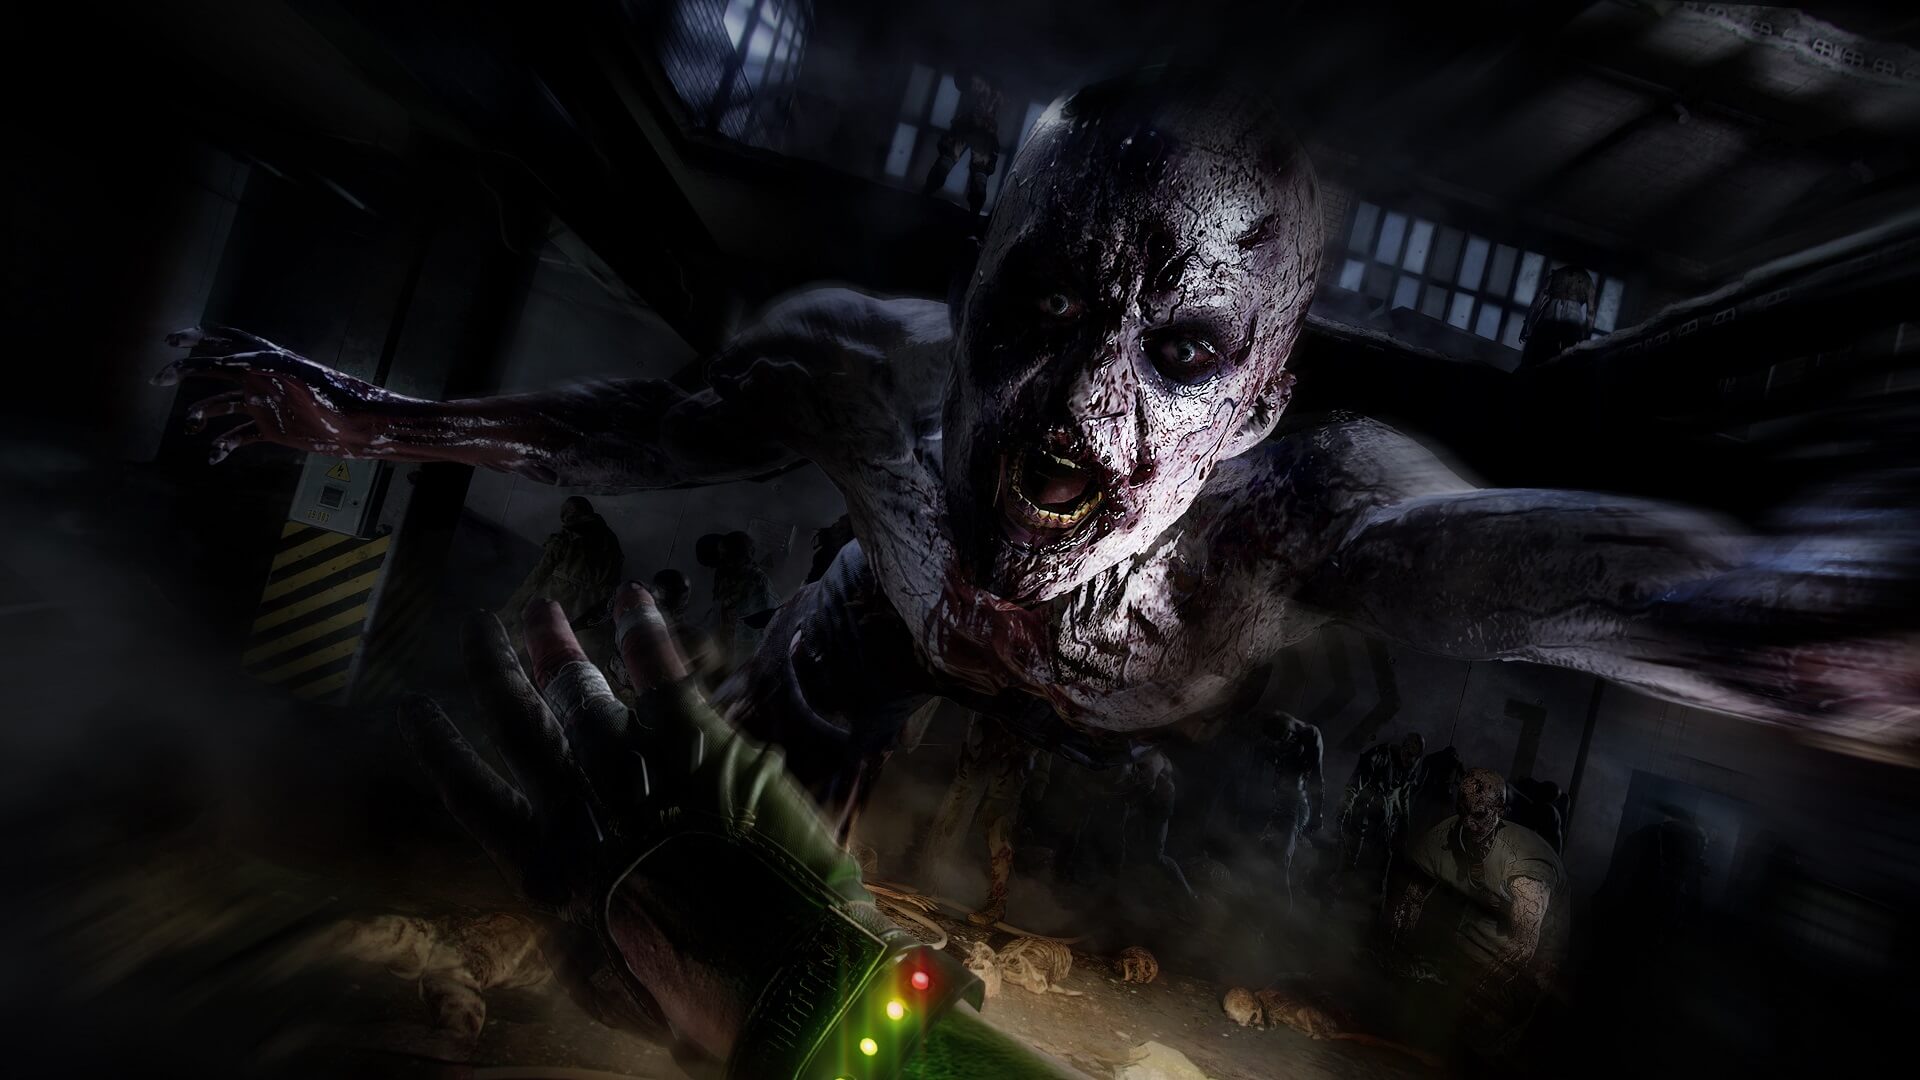 A zombie lunging at the player in Dying Light 2